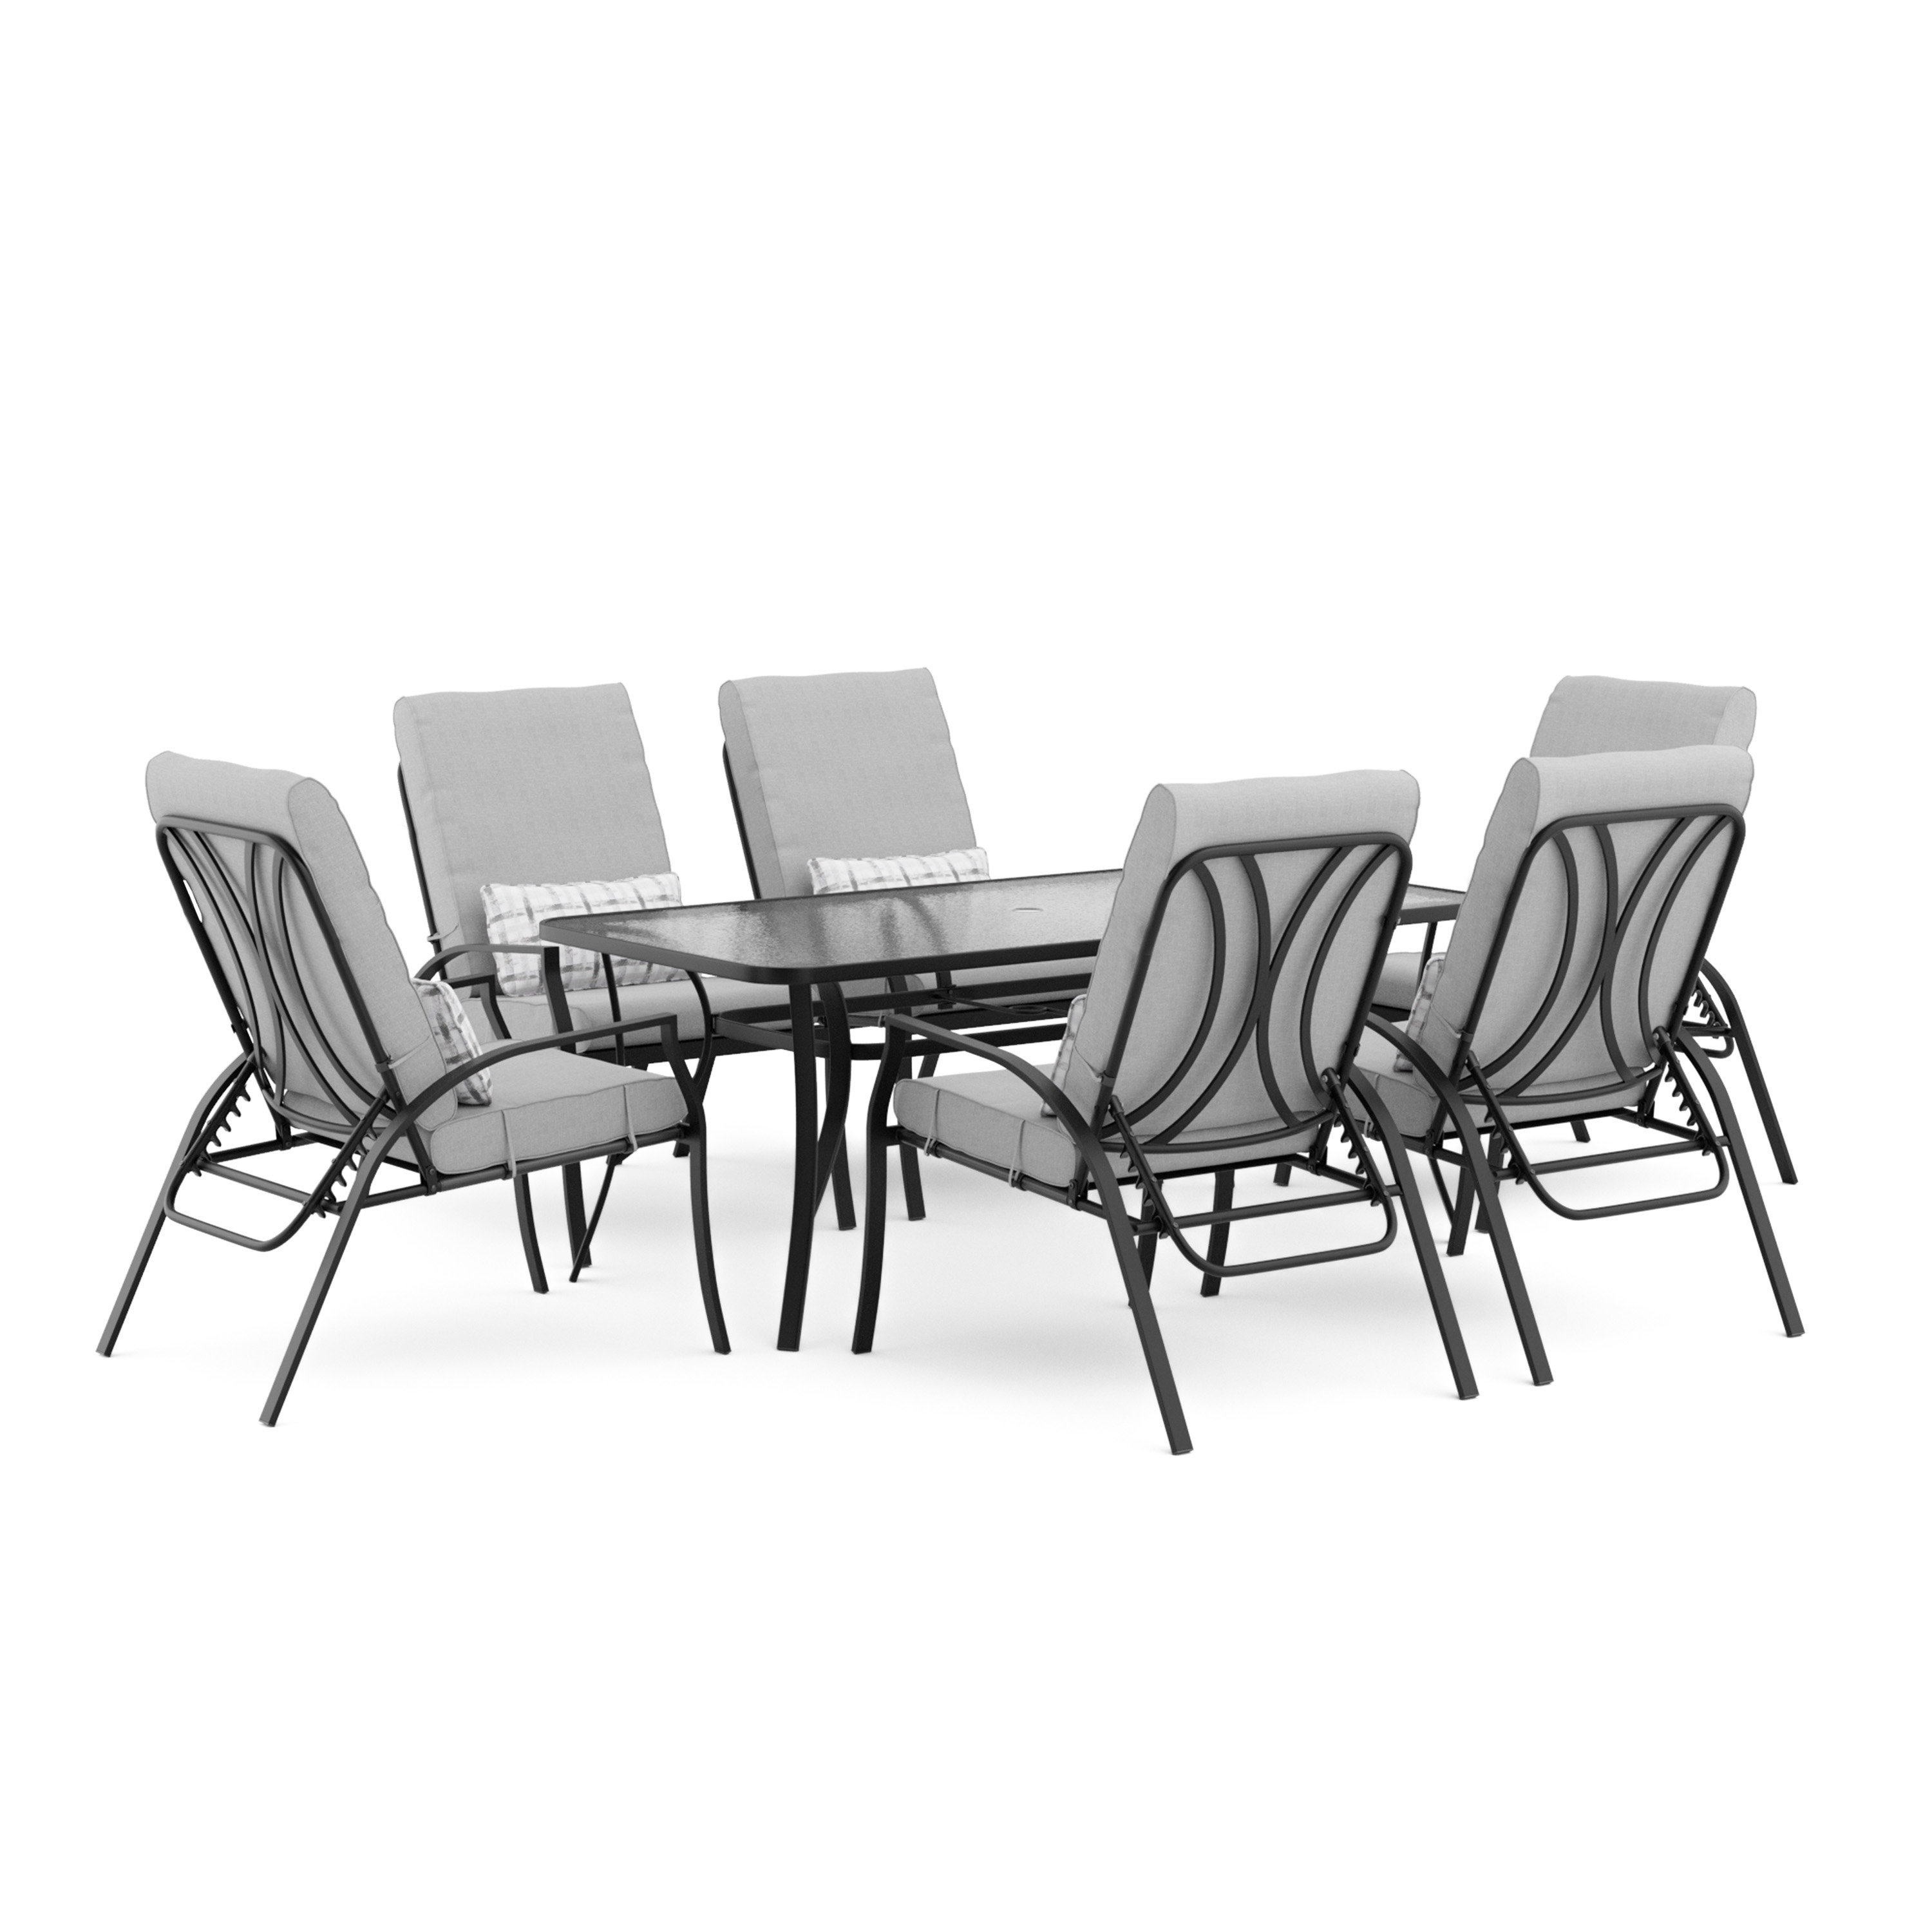 greemotion Tunning 6 - Person Rectangular Set Cushions Dining | Outdoor Wayfair with